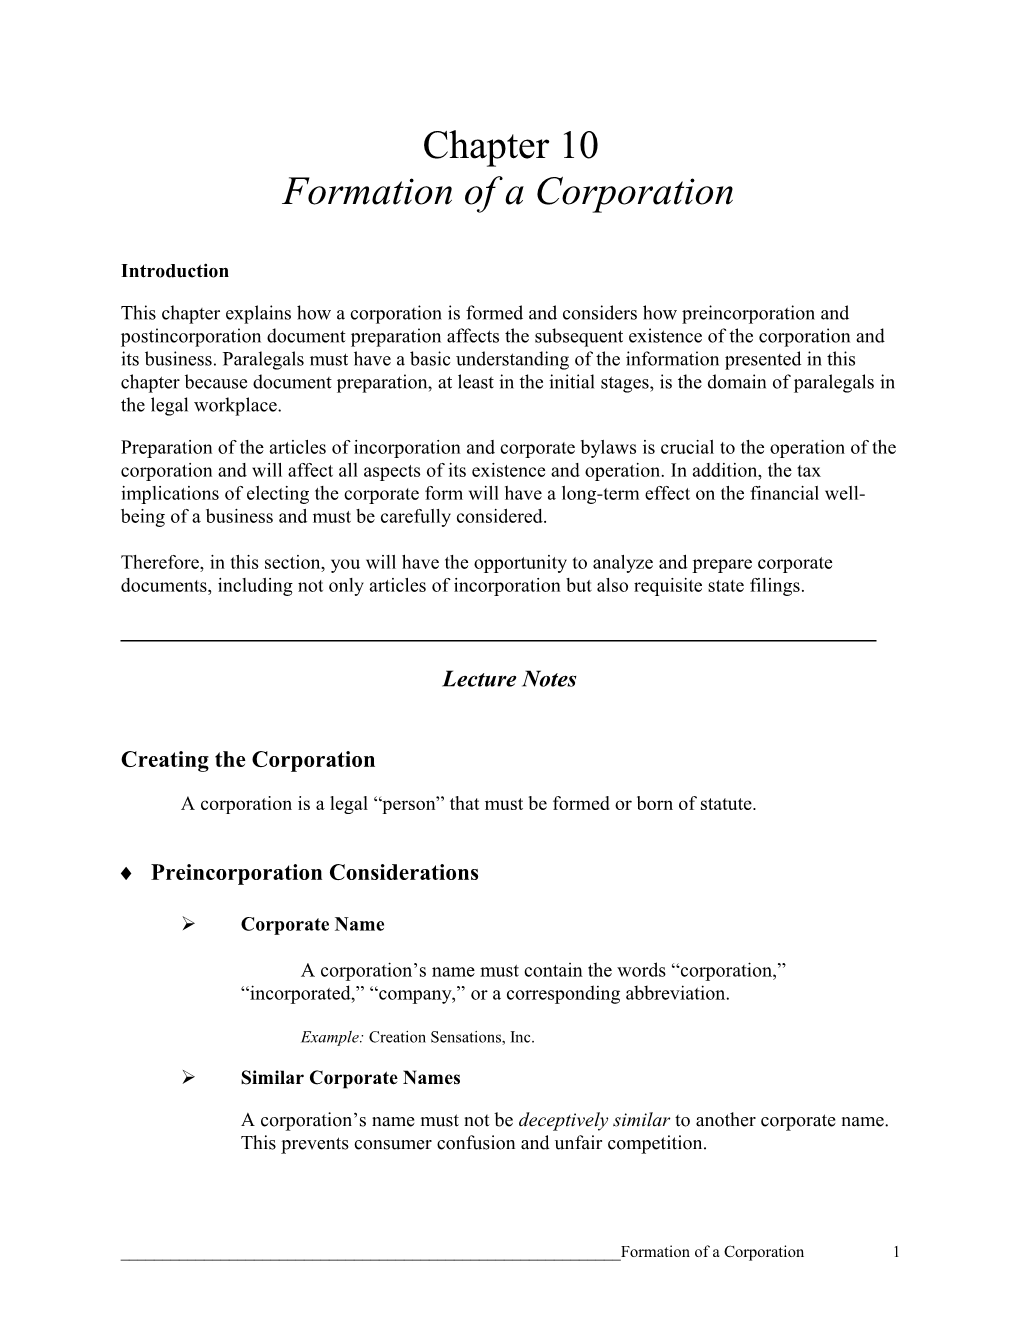 Formation of a Corporation